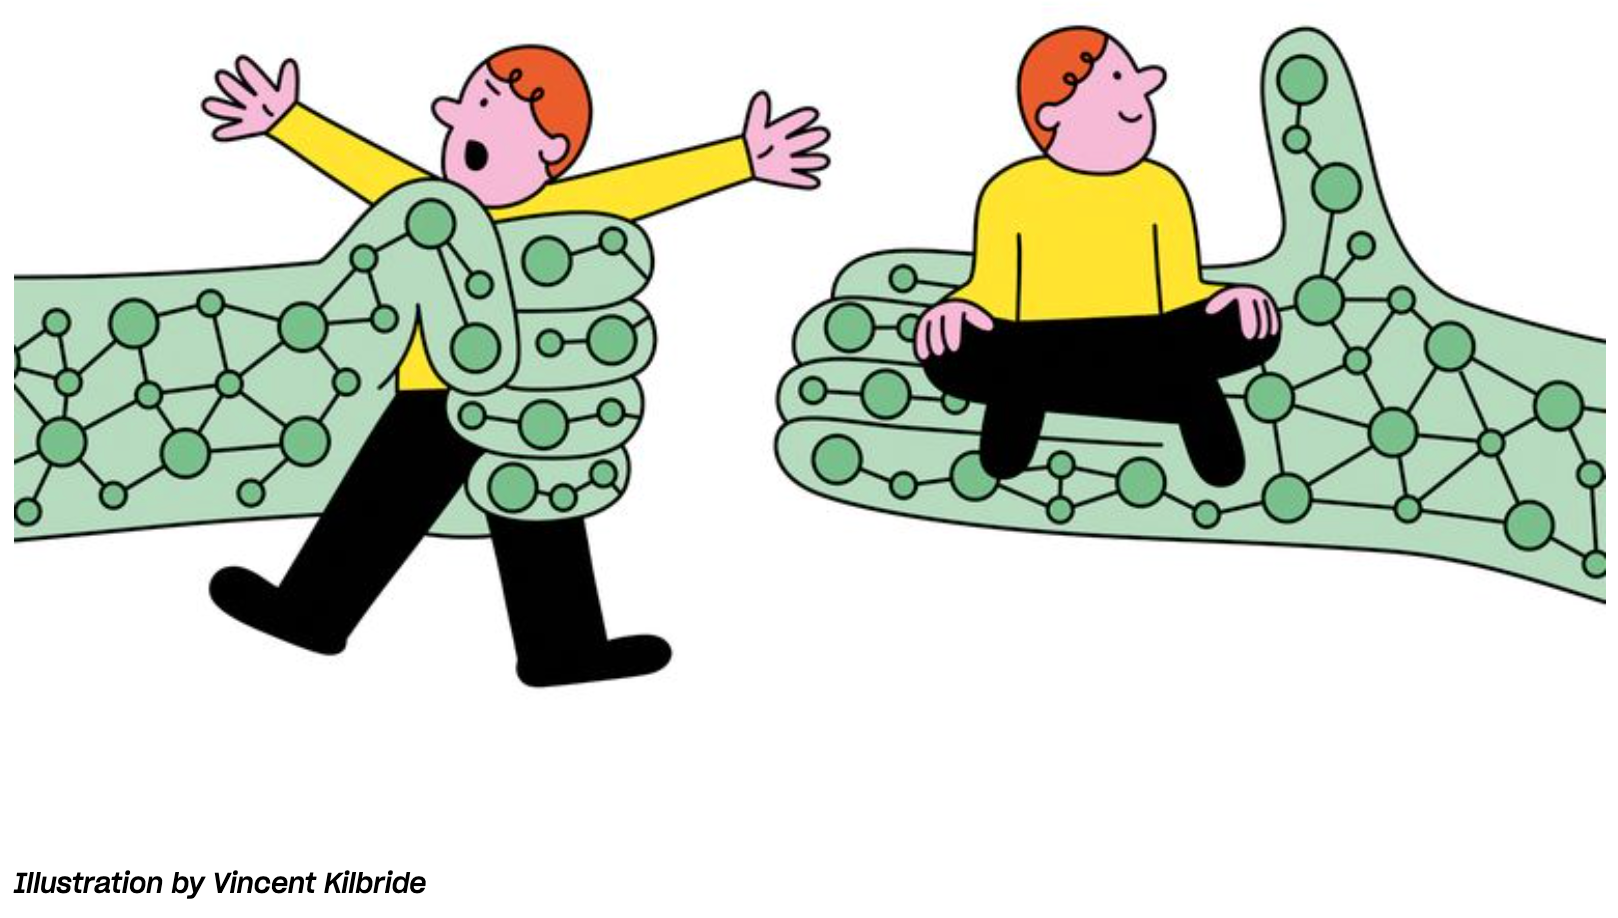 Illustration shows two different green hands, one emerging from the left and another from the right side of the frame. The hands are filled in with a pattern of dots connected by lines, evoking a chemical molecule diagram. The leftmost hand holds an illustrated person who is small enough to be completely encircled by the hand's fingers. He wears a yellow shirt and black pants and looks distressed. The rightmost hand is held out with a flat palm, and the same person is sitting peacefully on it, legs crossed.